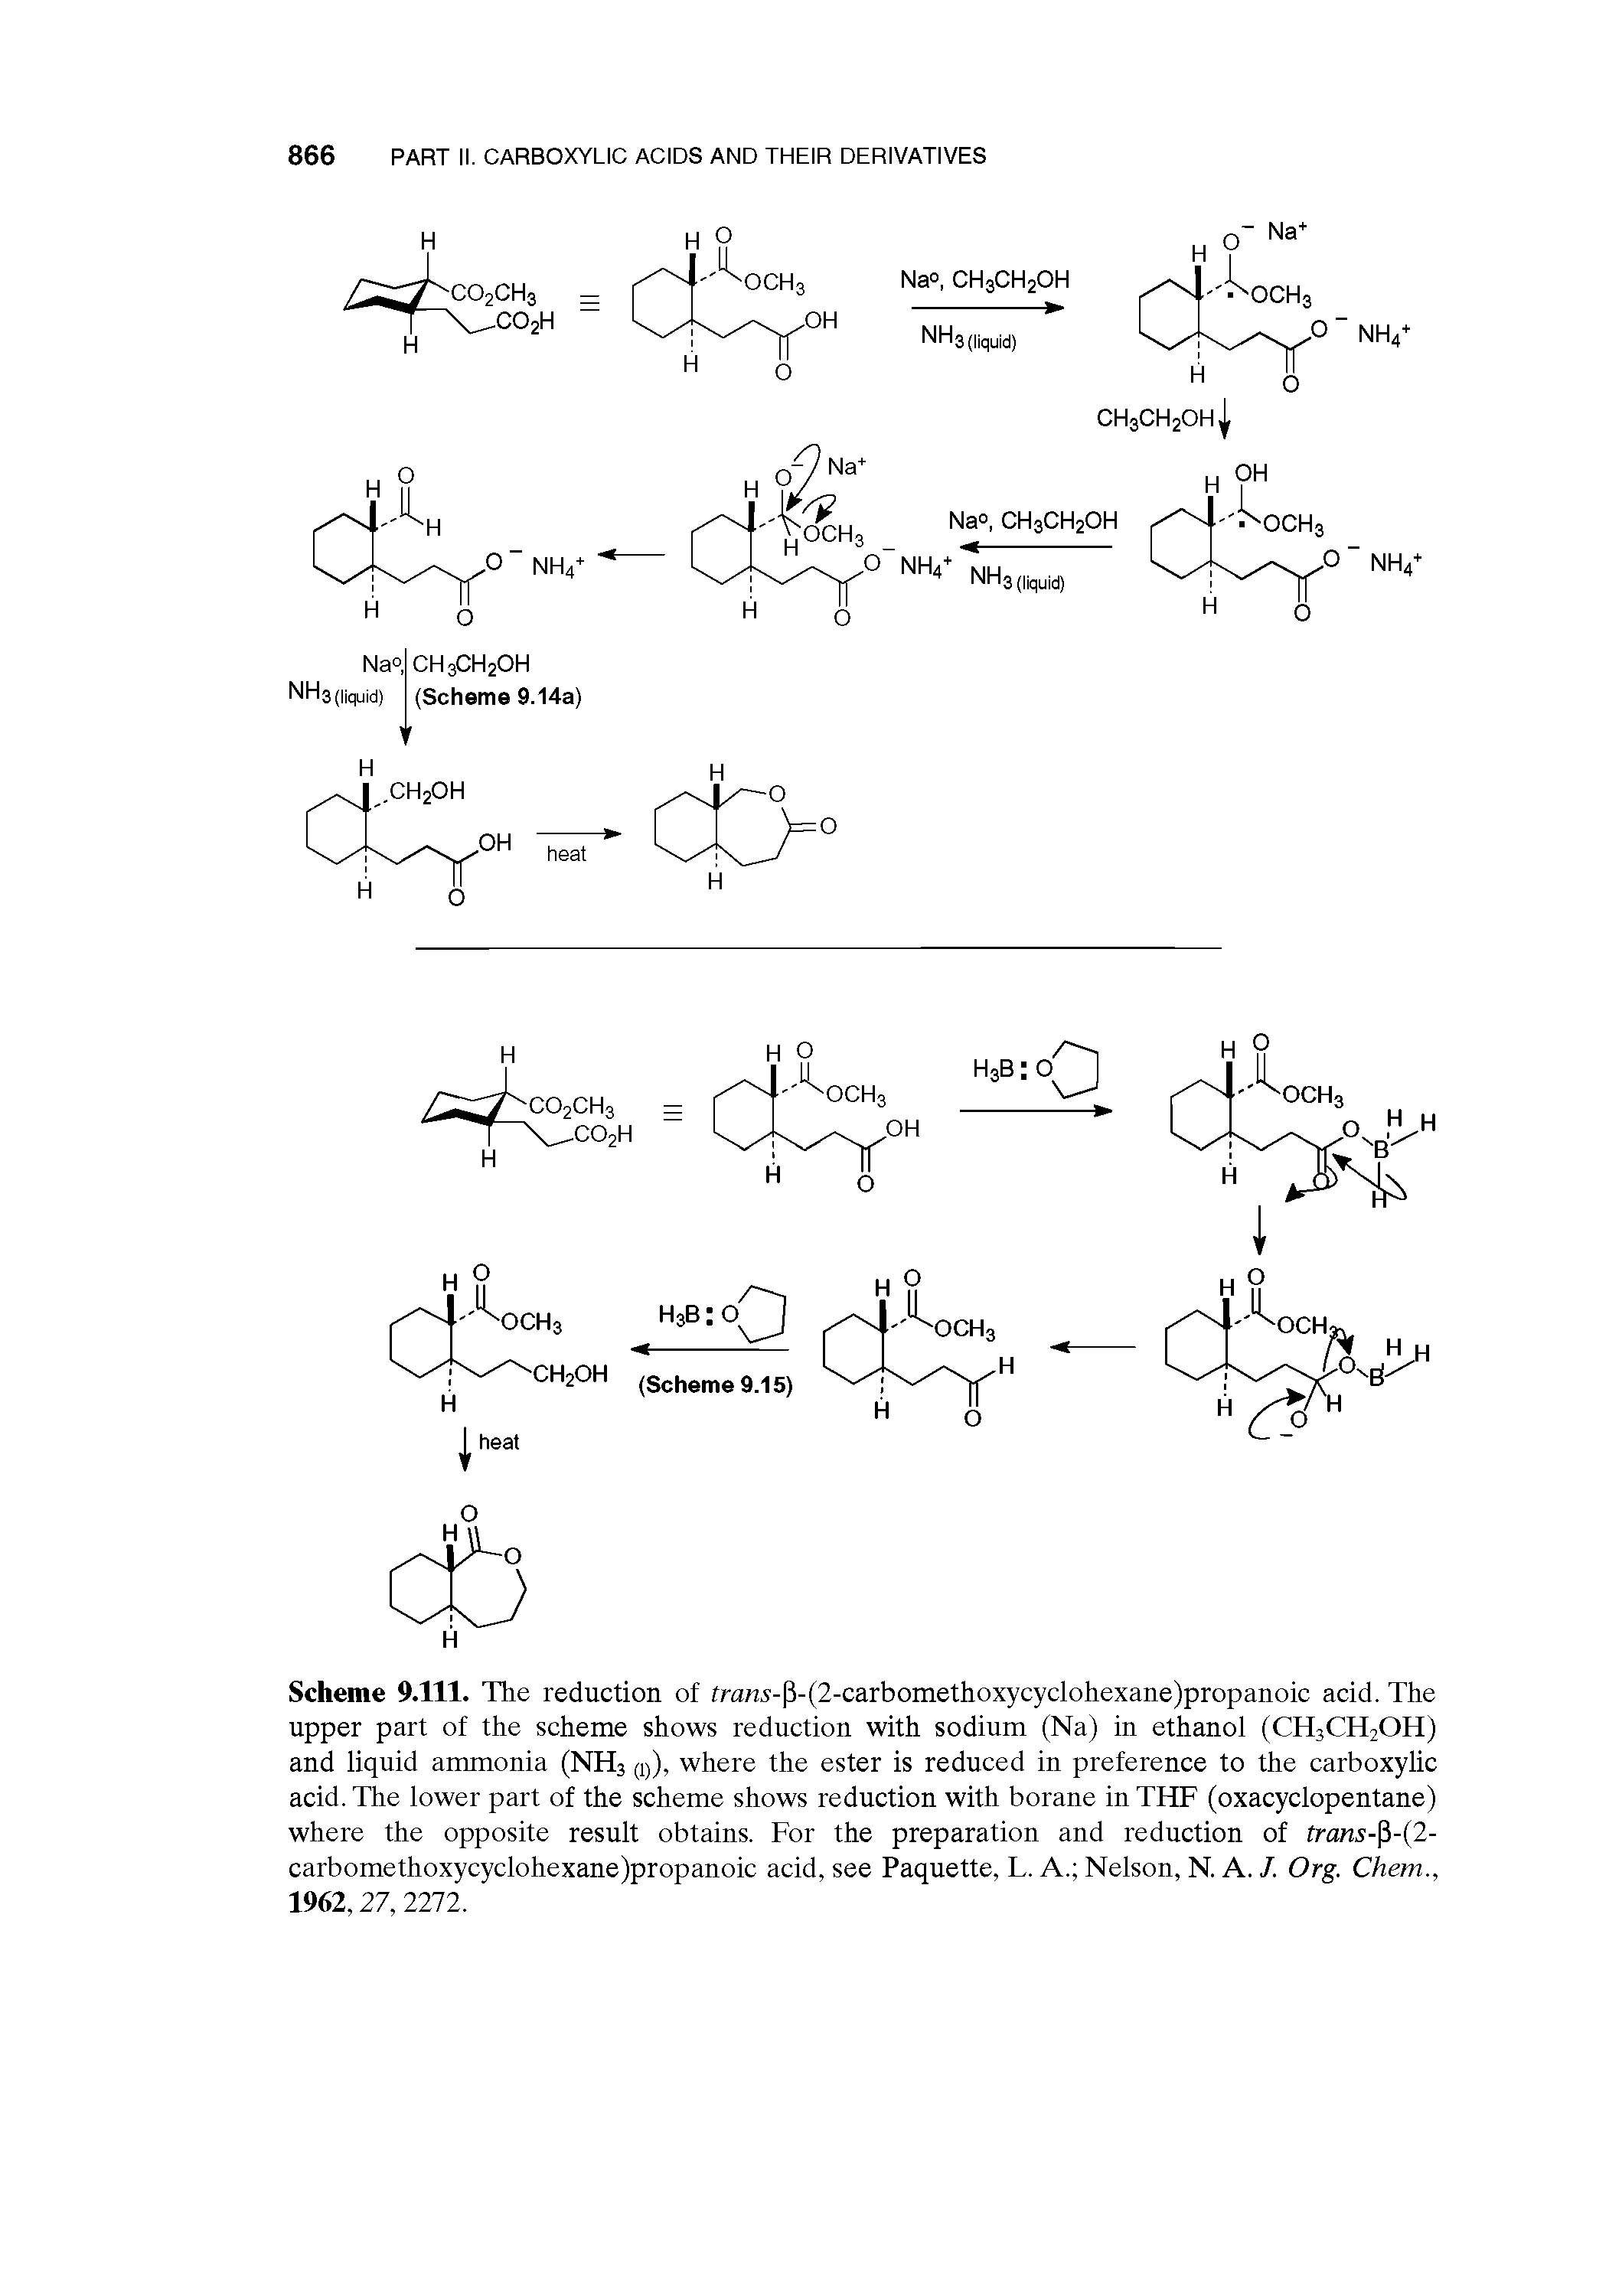 Scheme 9.111. The reduction of fra s-P-(2-carbomethoxycyclohexane)propanoic acid. The upper part of the scheme shows reduction with sodium (Na) in ethanol (CH3CH2OH) and liquid ammonia (NH3 (y), where the ester is reduced in preference to the carboxylic acid. The lower part of the scheme shows reduction with borane in THF (oxacyclopentane) where the opposite result obtains. For the preparation and reduction of trms- -(2-carbomethoxycyclohexane)propanoic acid, see Paquette, L. A. Nelson, N. A. /. Org. Chem., 1962,27, 2272.